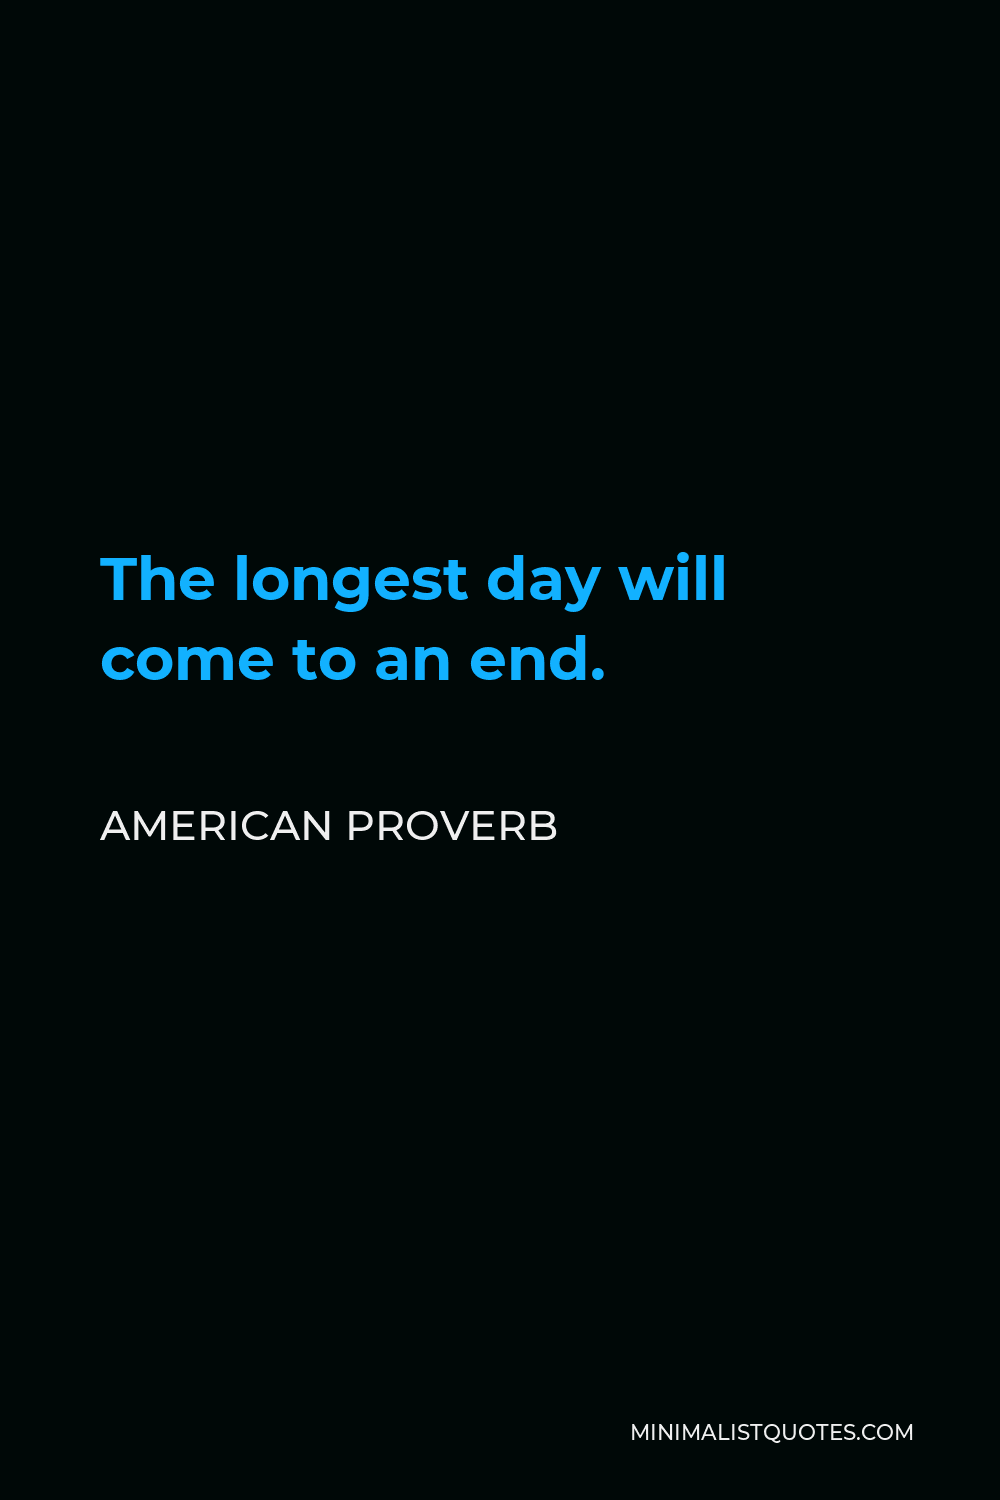 American Proverb Quote - The longest day will come to an end.